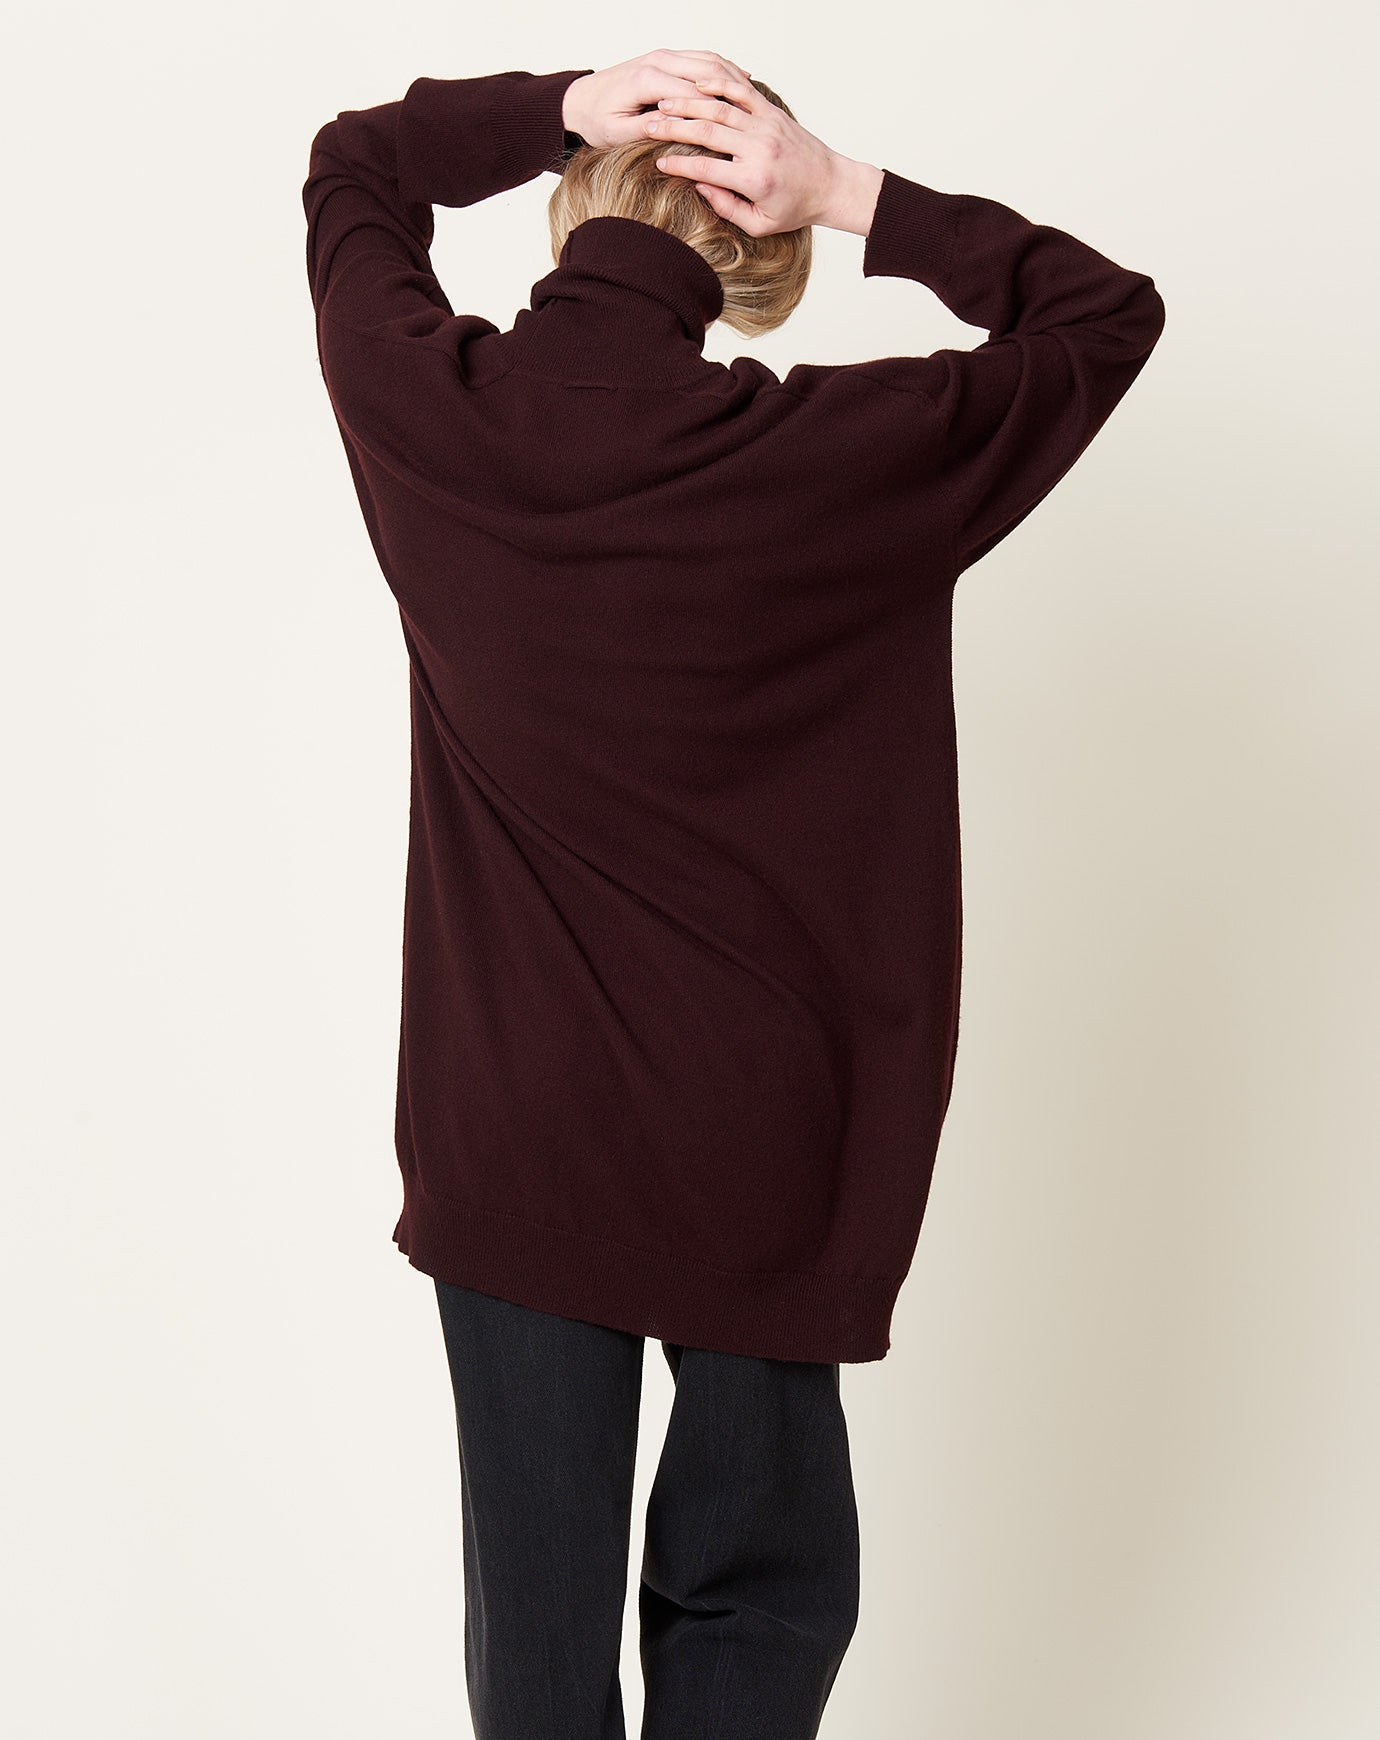 6397 Slouchy Turtleneck in Chocolate